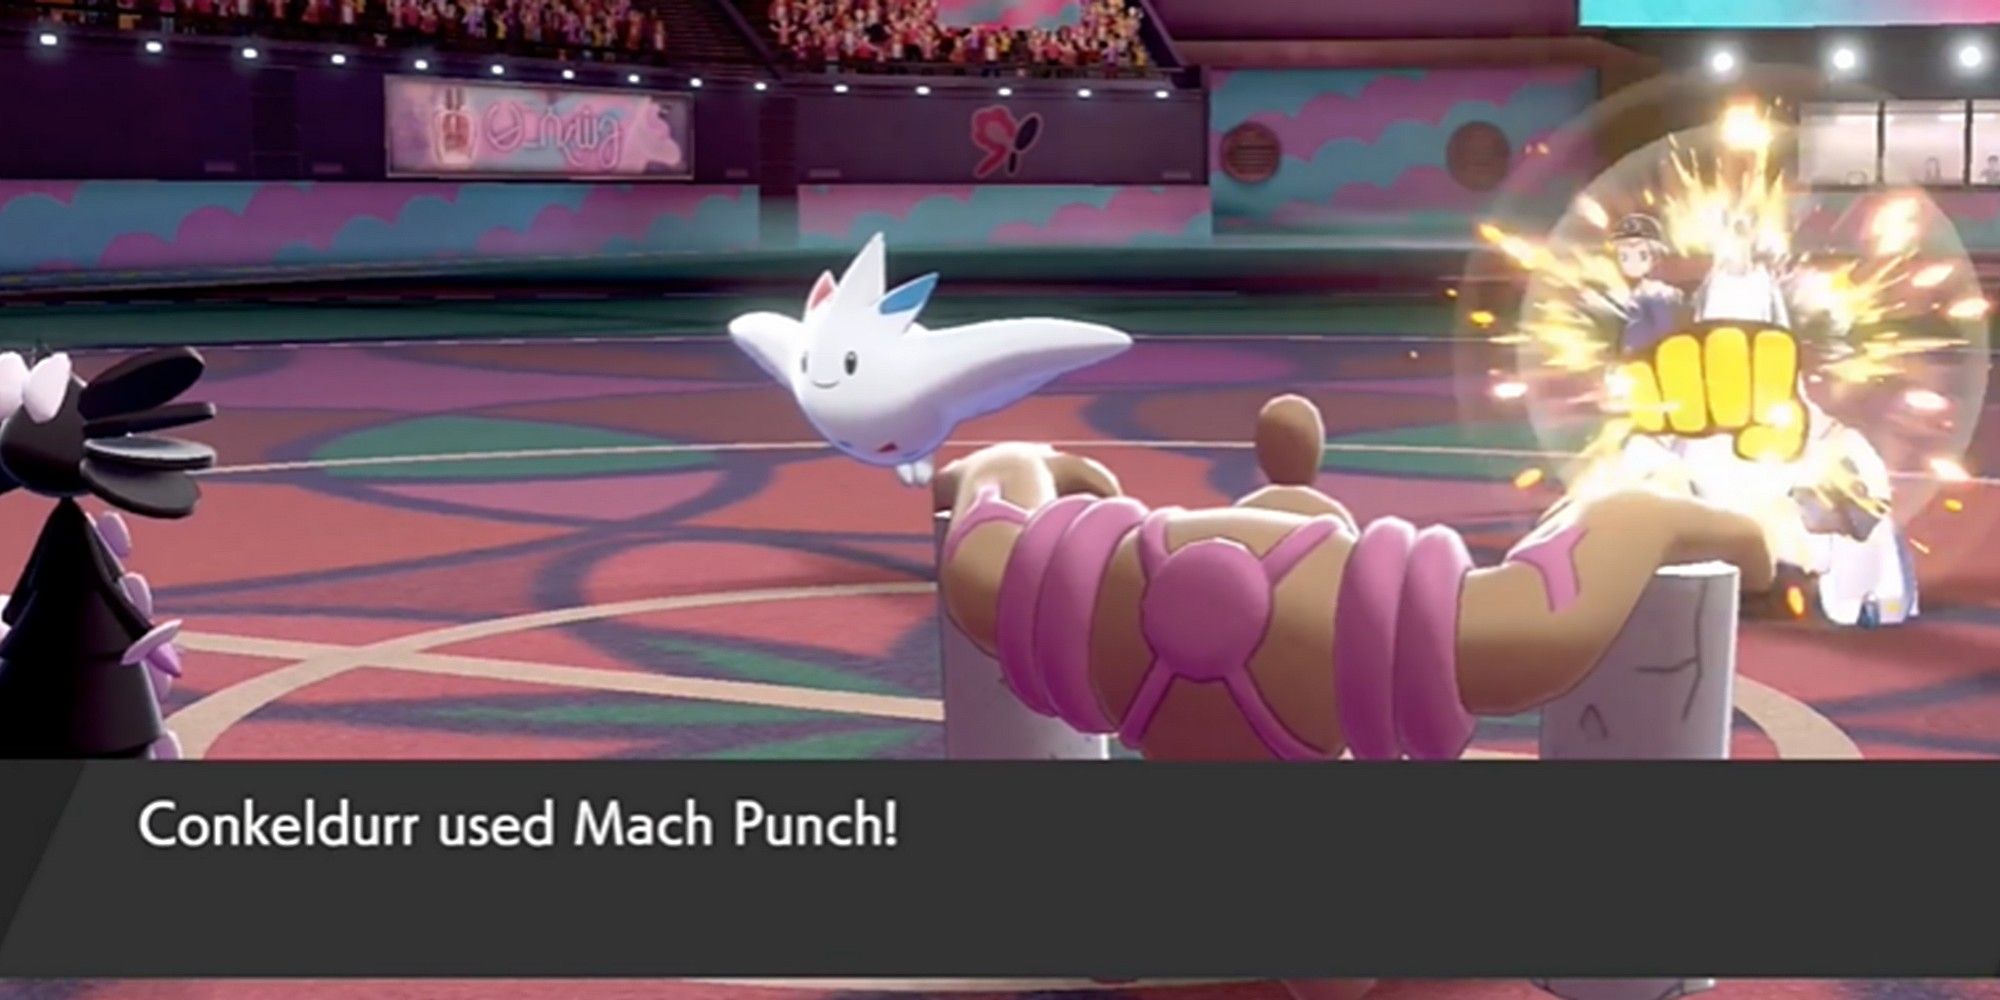 The move Mach Punch from Pokemon